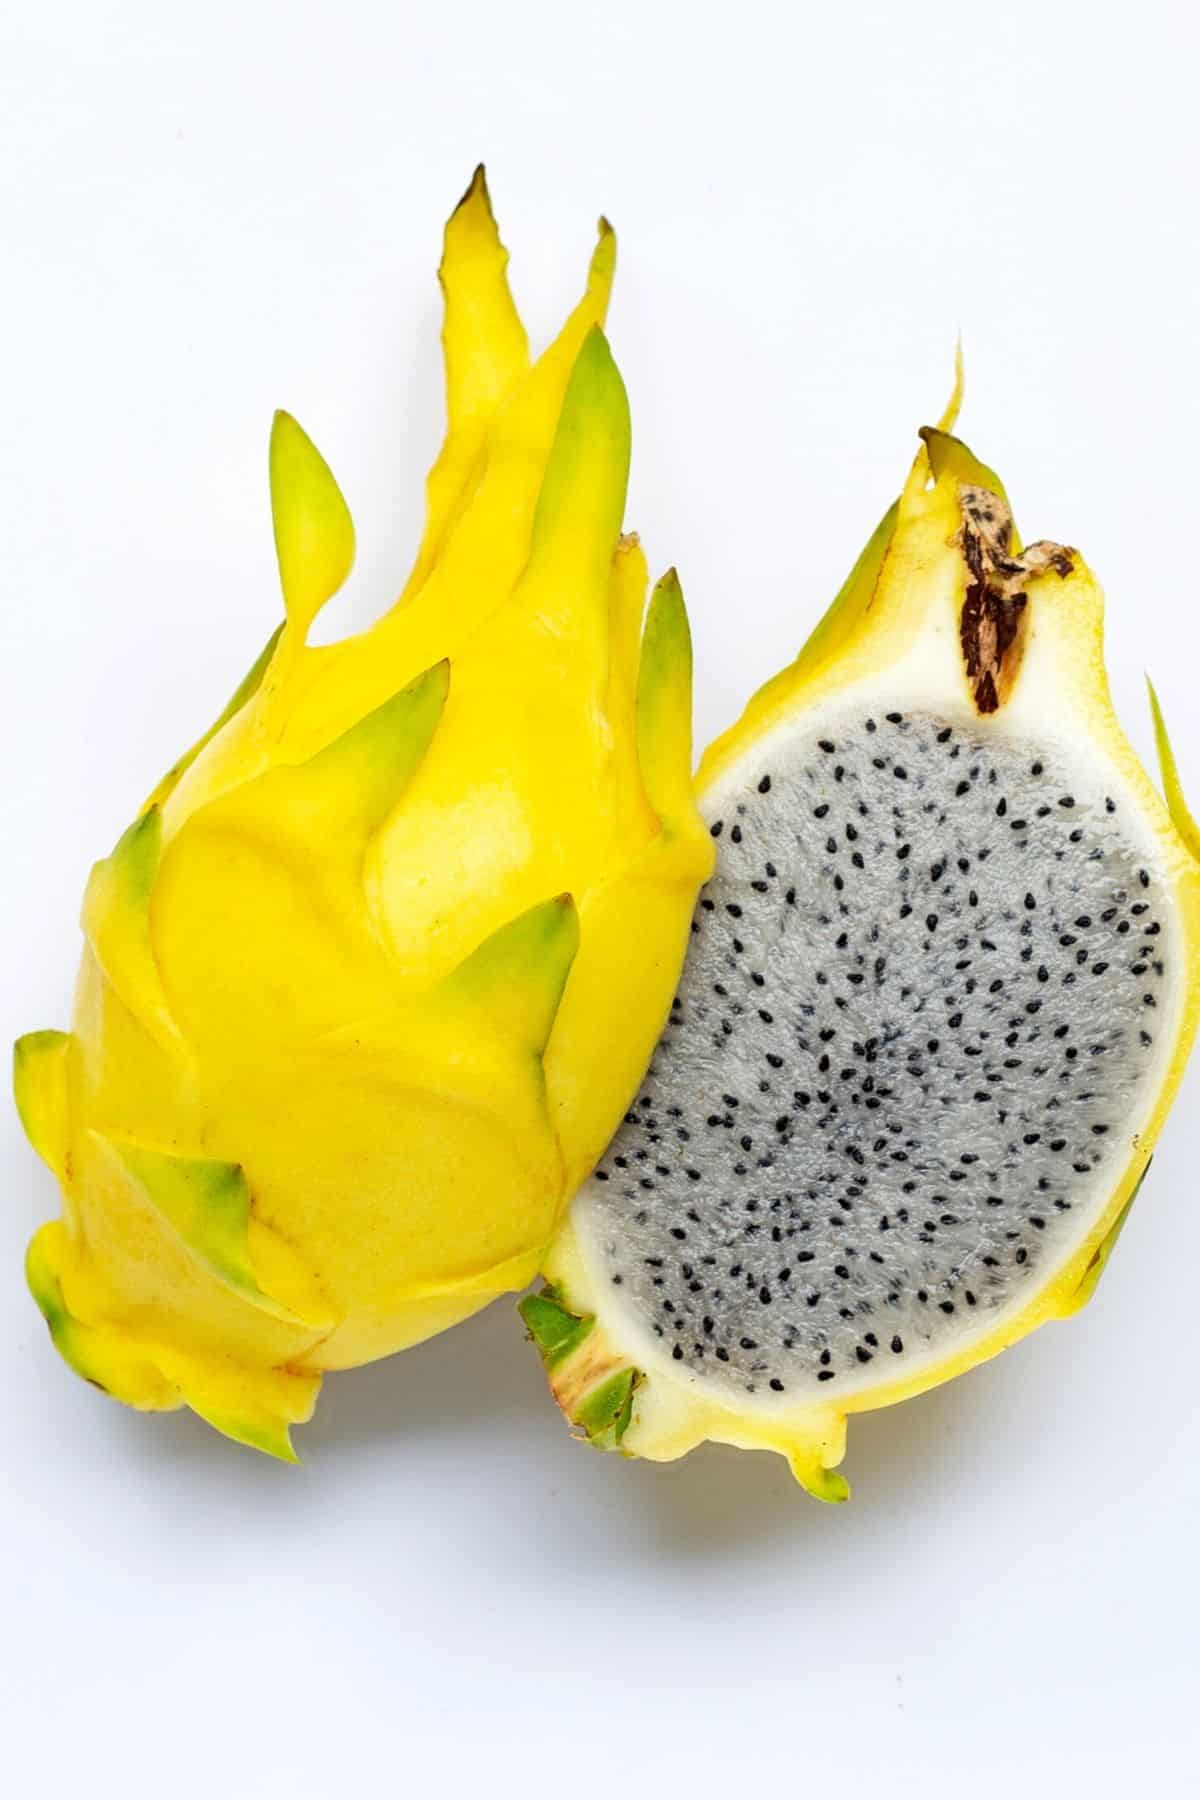 A large yellow dragonfruit cut in half on a white surface.